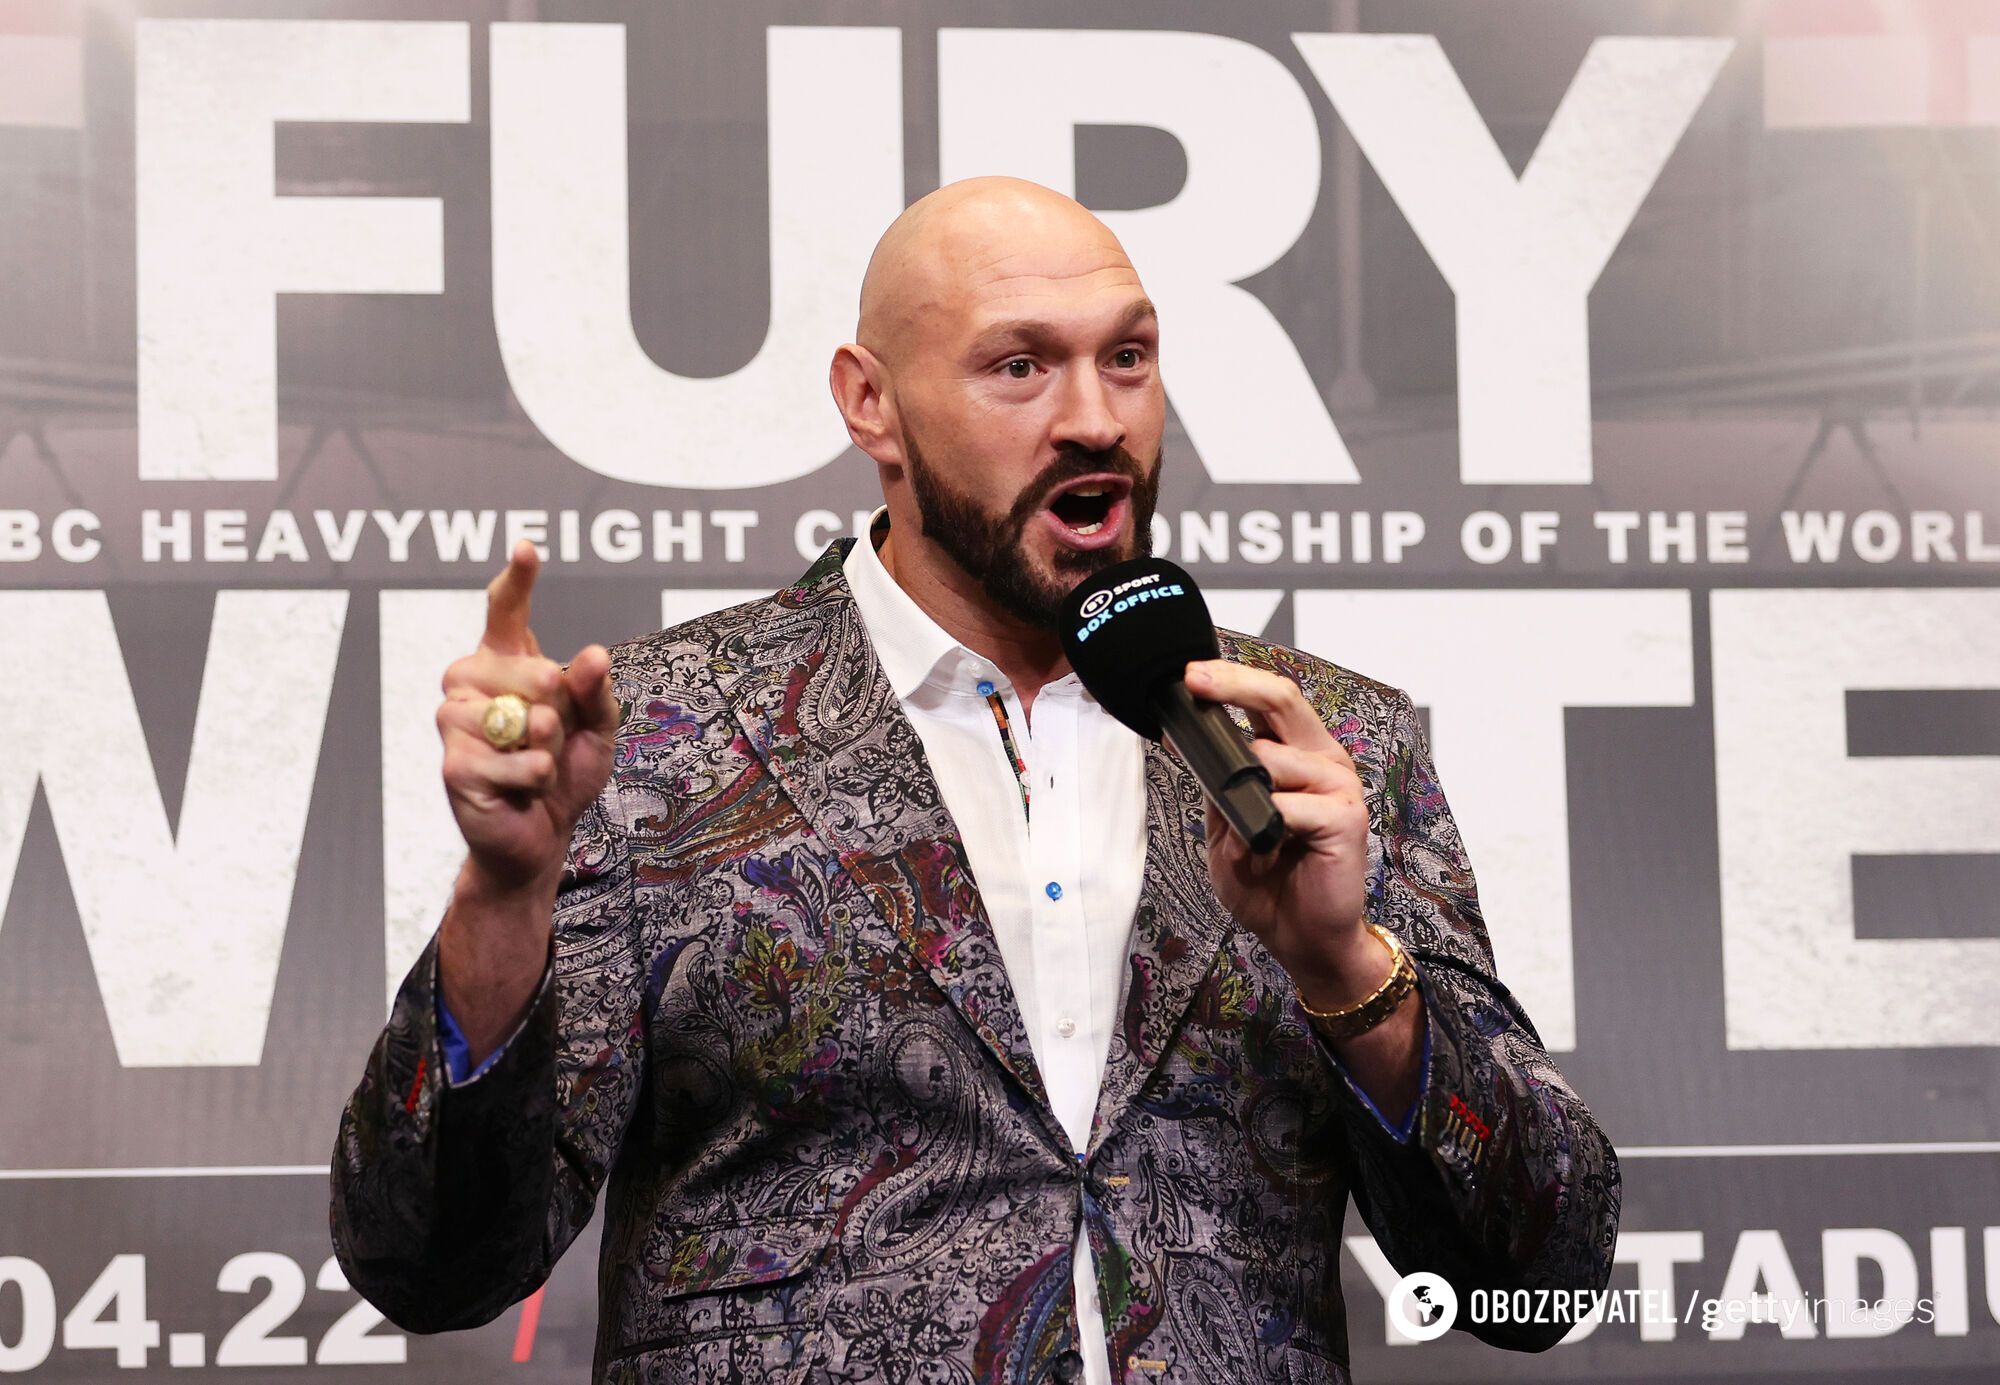 No rematch: It became known what will happen to the winner of the Usyk-Dubois fight